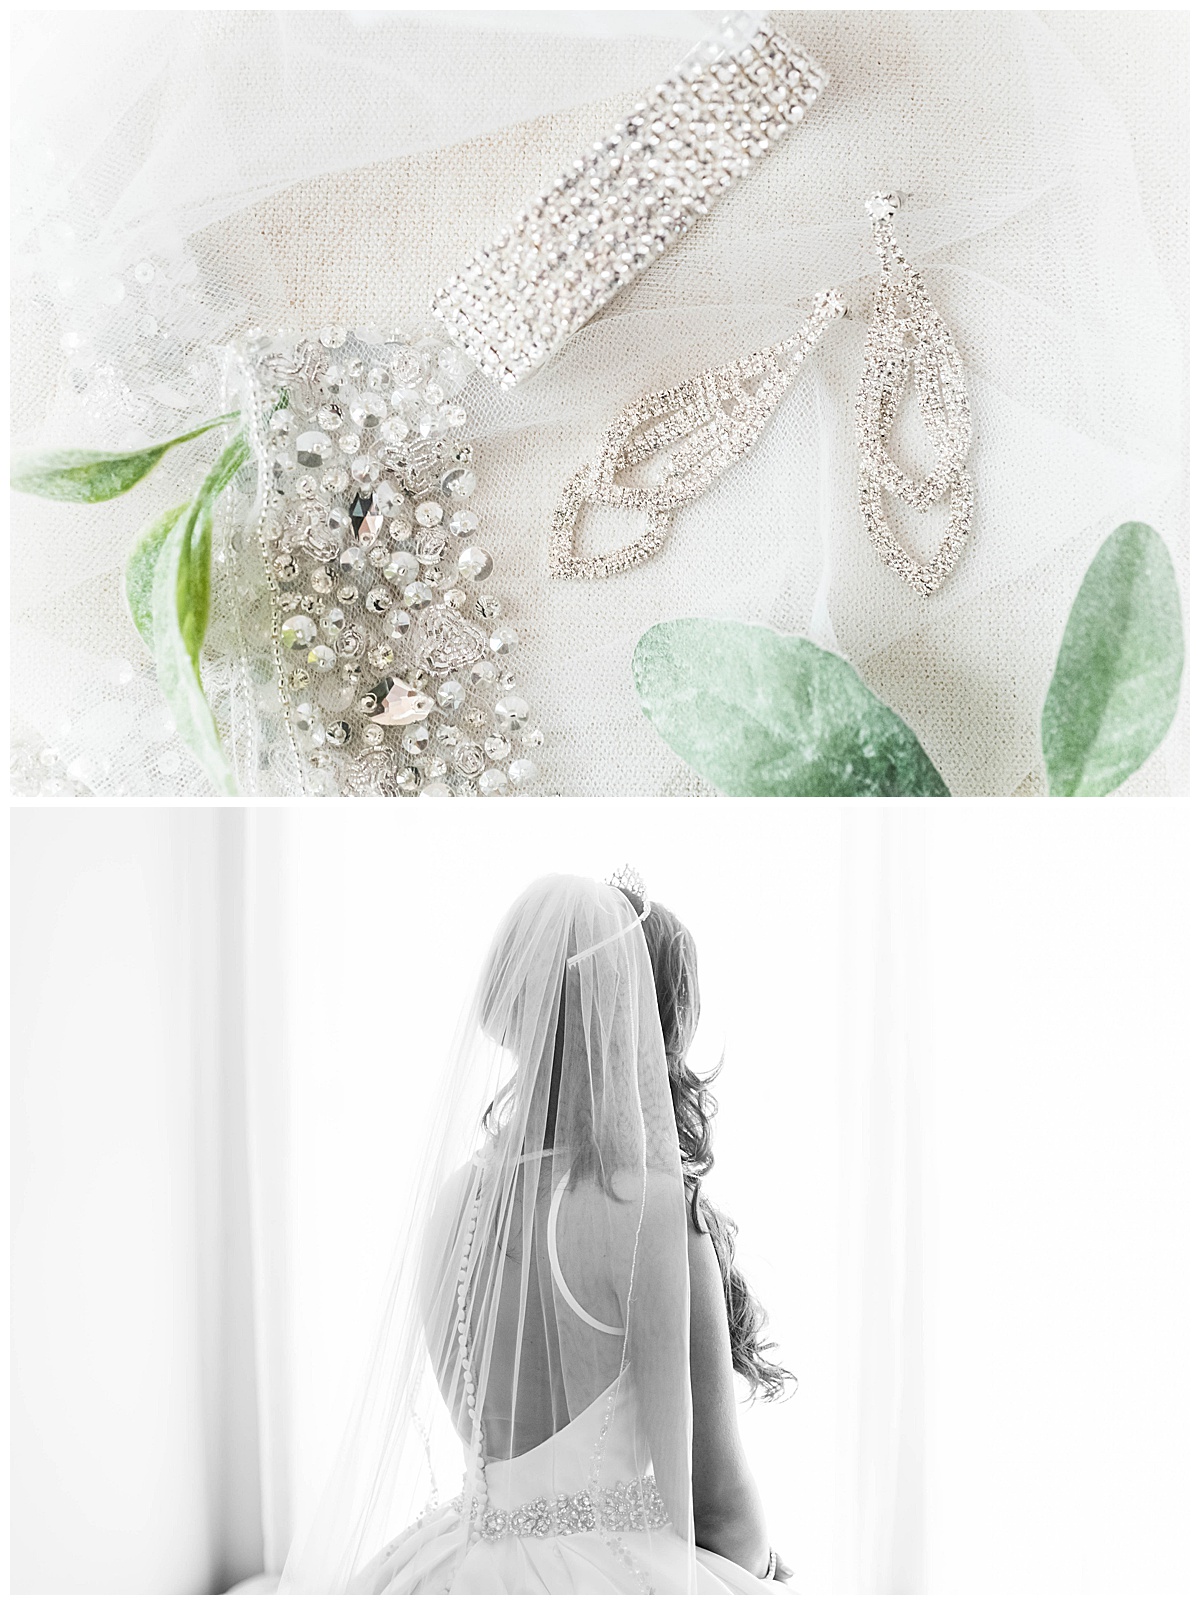 Independence Golf Club Wedding: Bridal jewelry with greenery, bridal portrait, veil, black and white photo